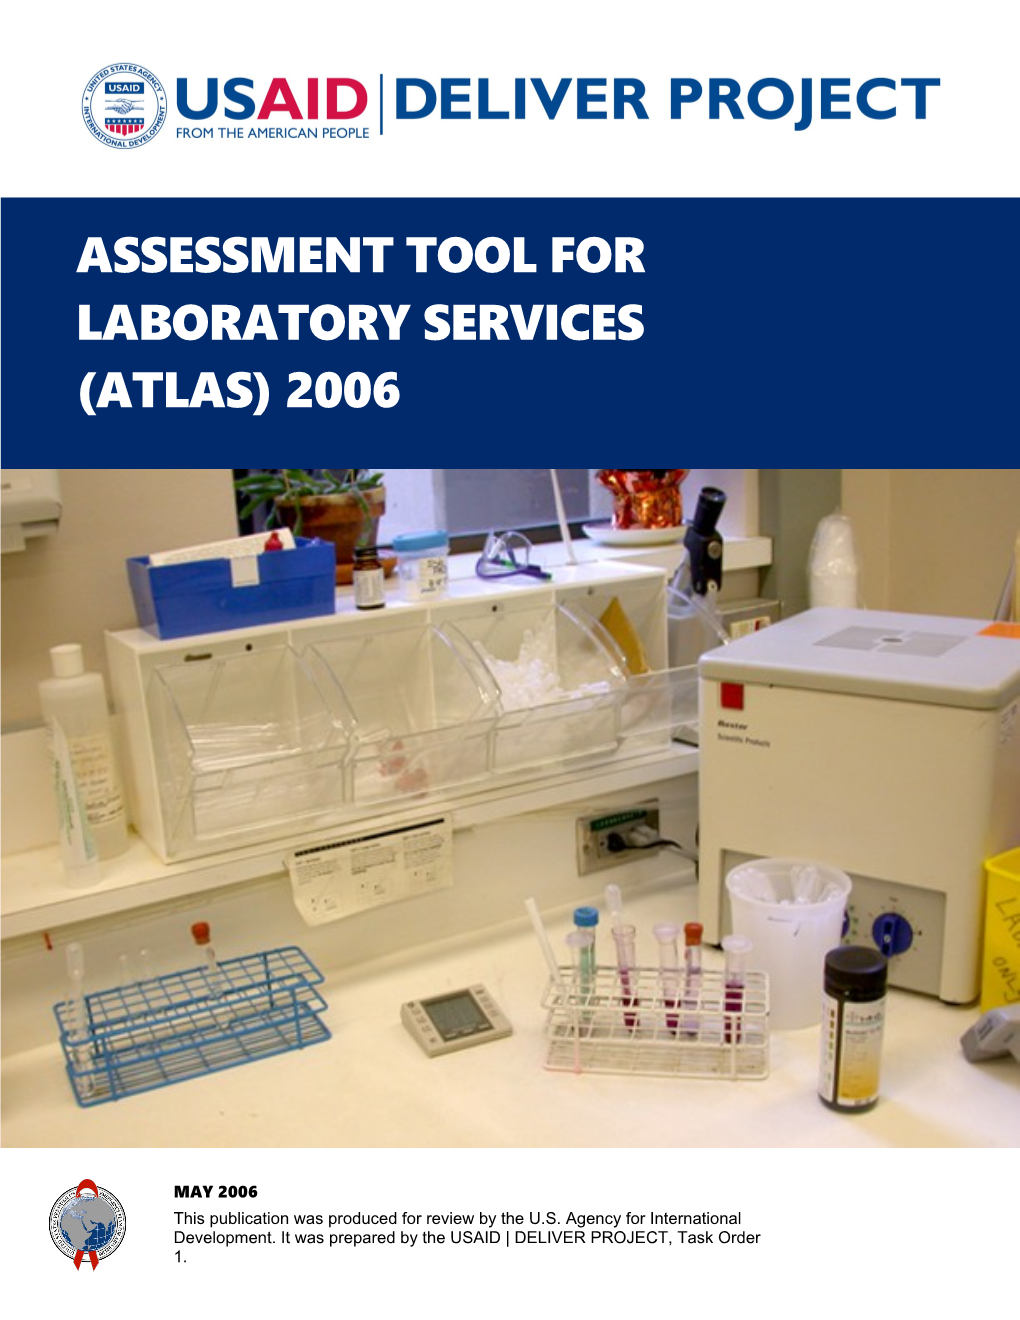 Assessment Tool for Laboratory Services (ATLAS) 2006, May 2006